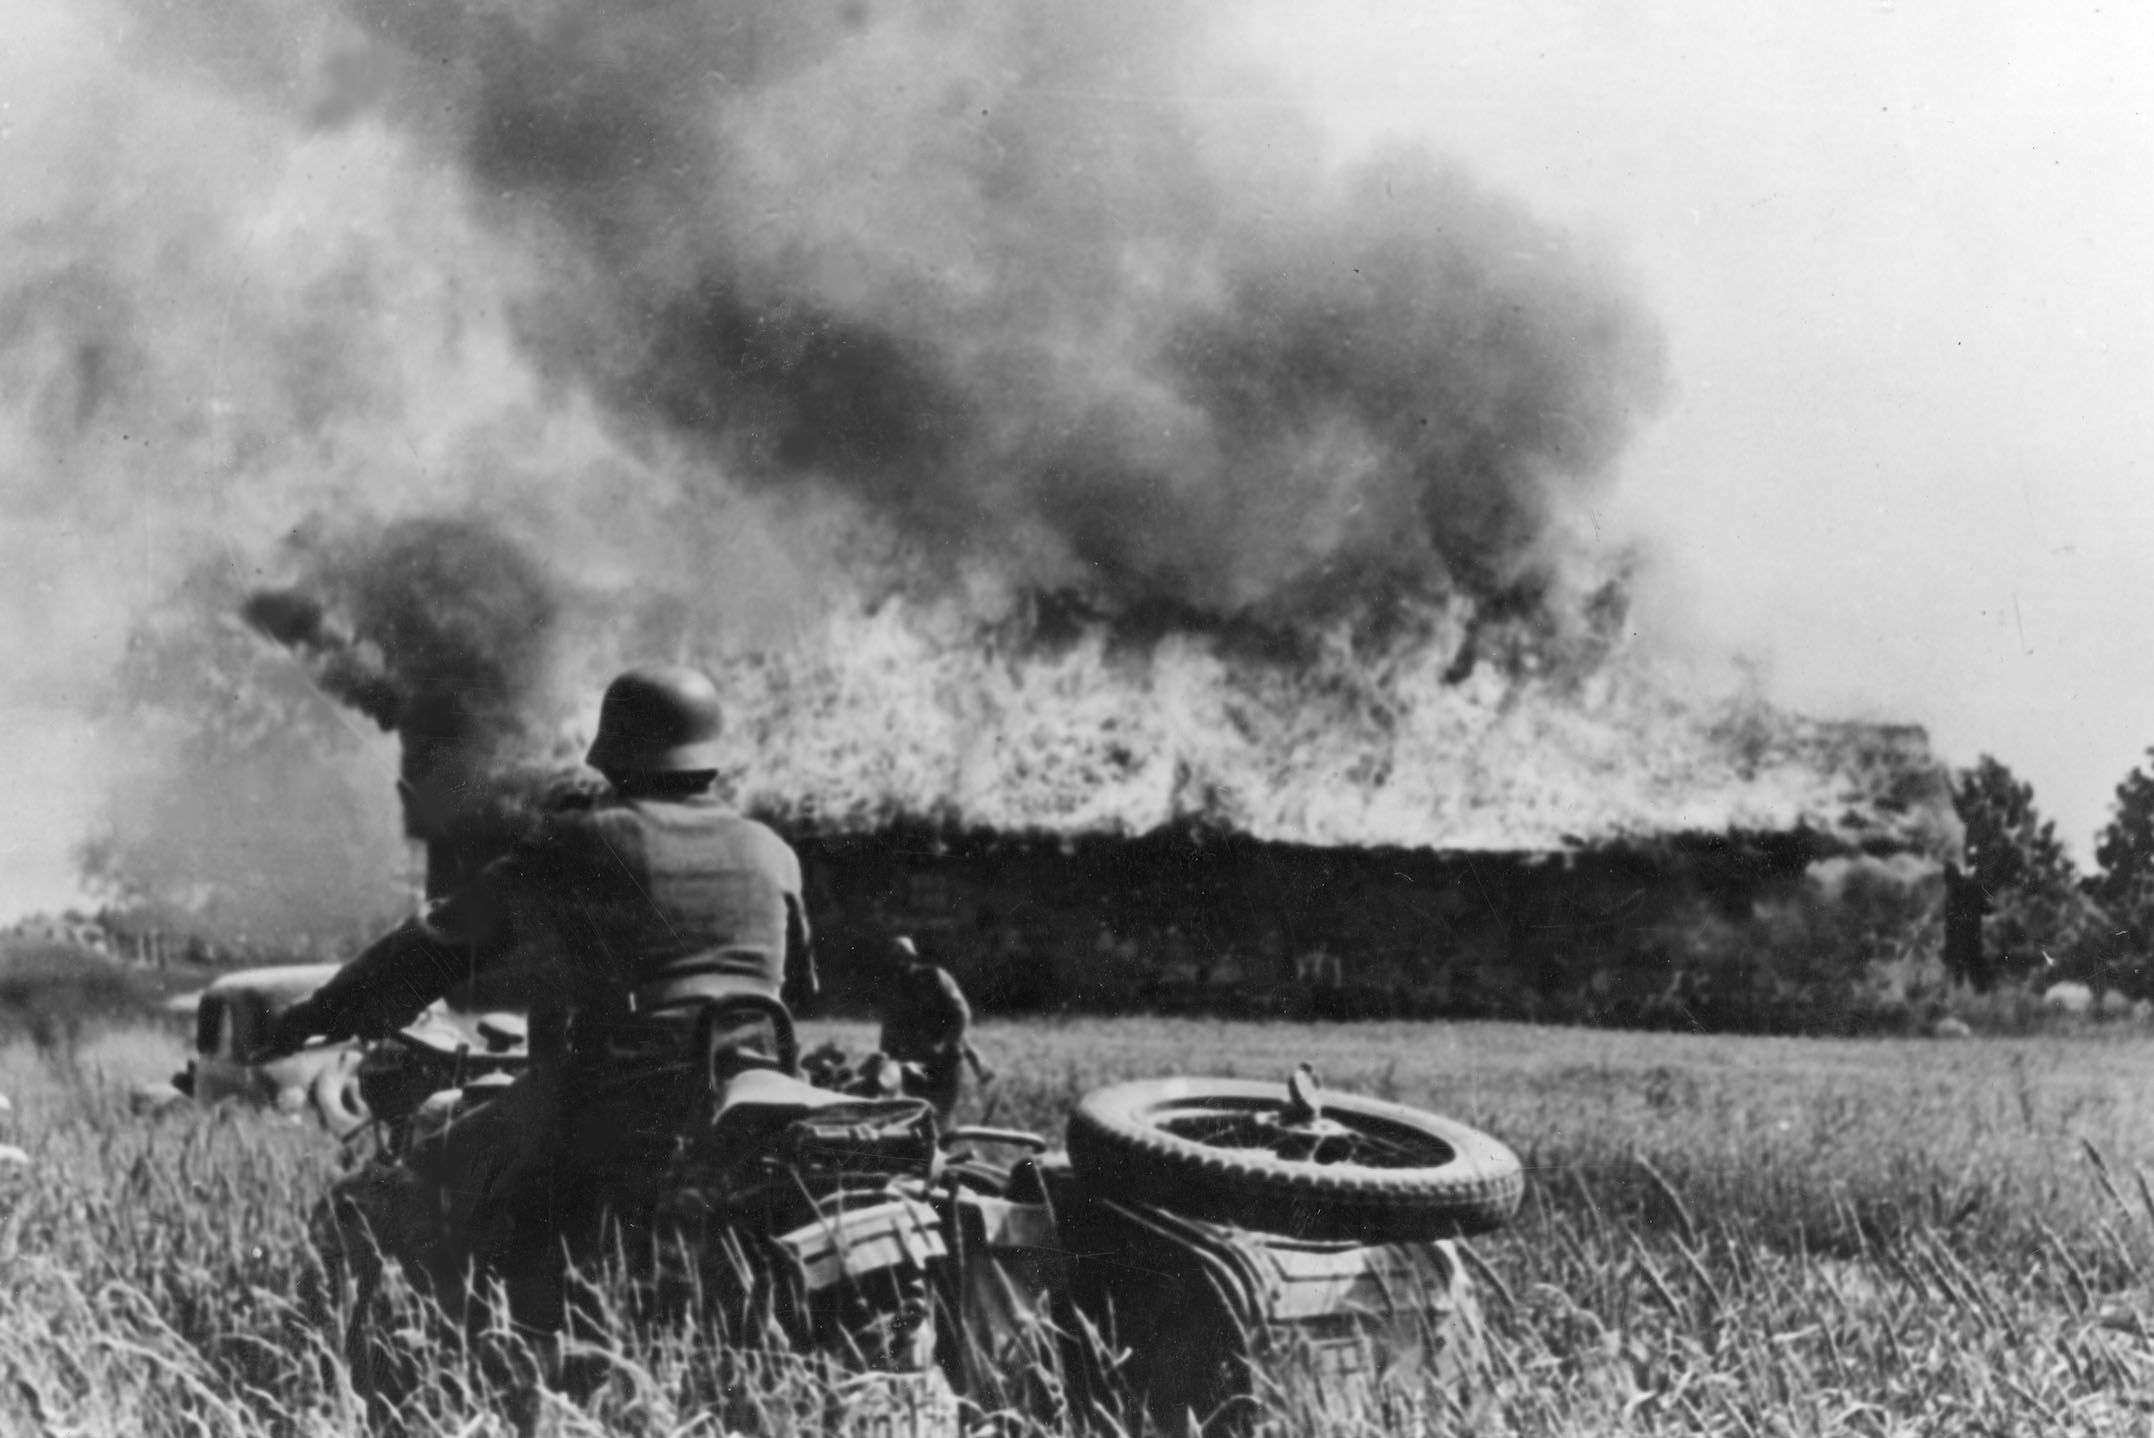 A German soldier watches a structure burn on the Eastern Front. Steinmeier recalled atrocities committed during Operation Barbarossa, Germany's invasion of the Soviet Union. / Polish State Archive